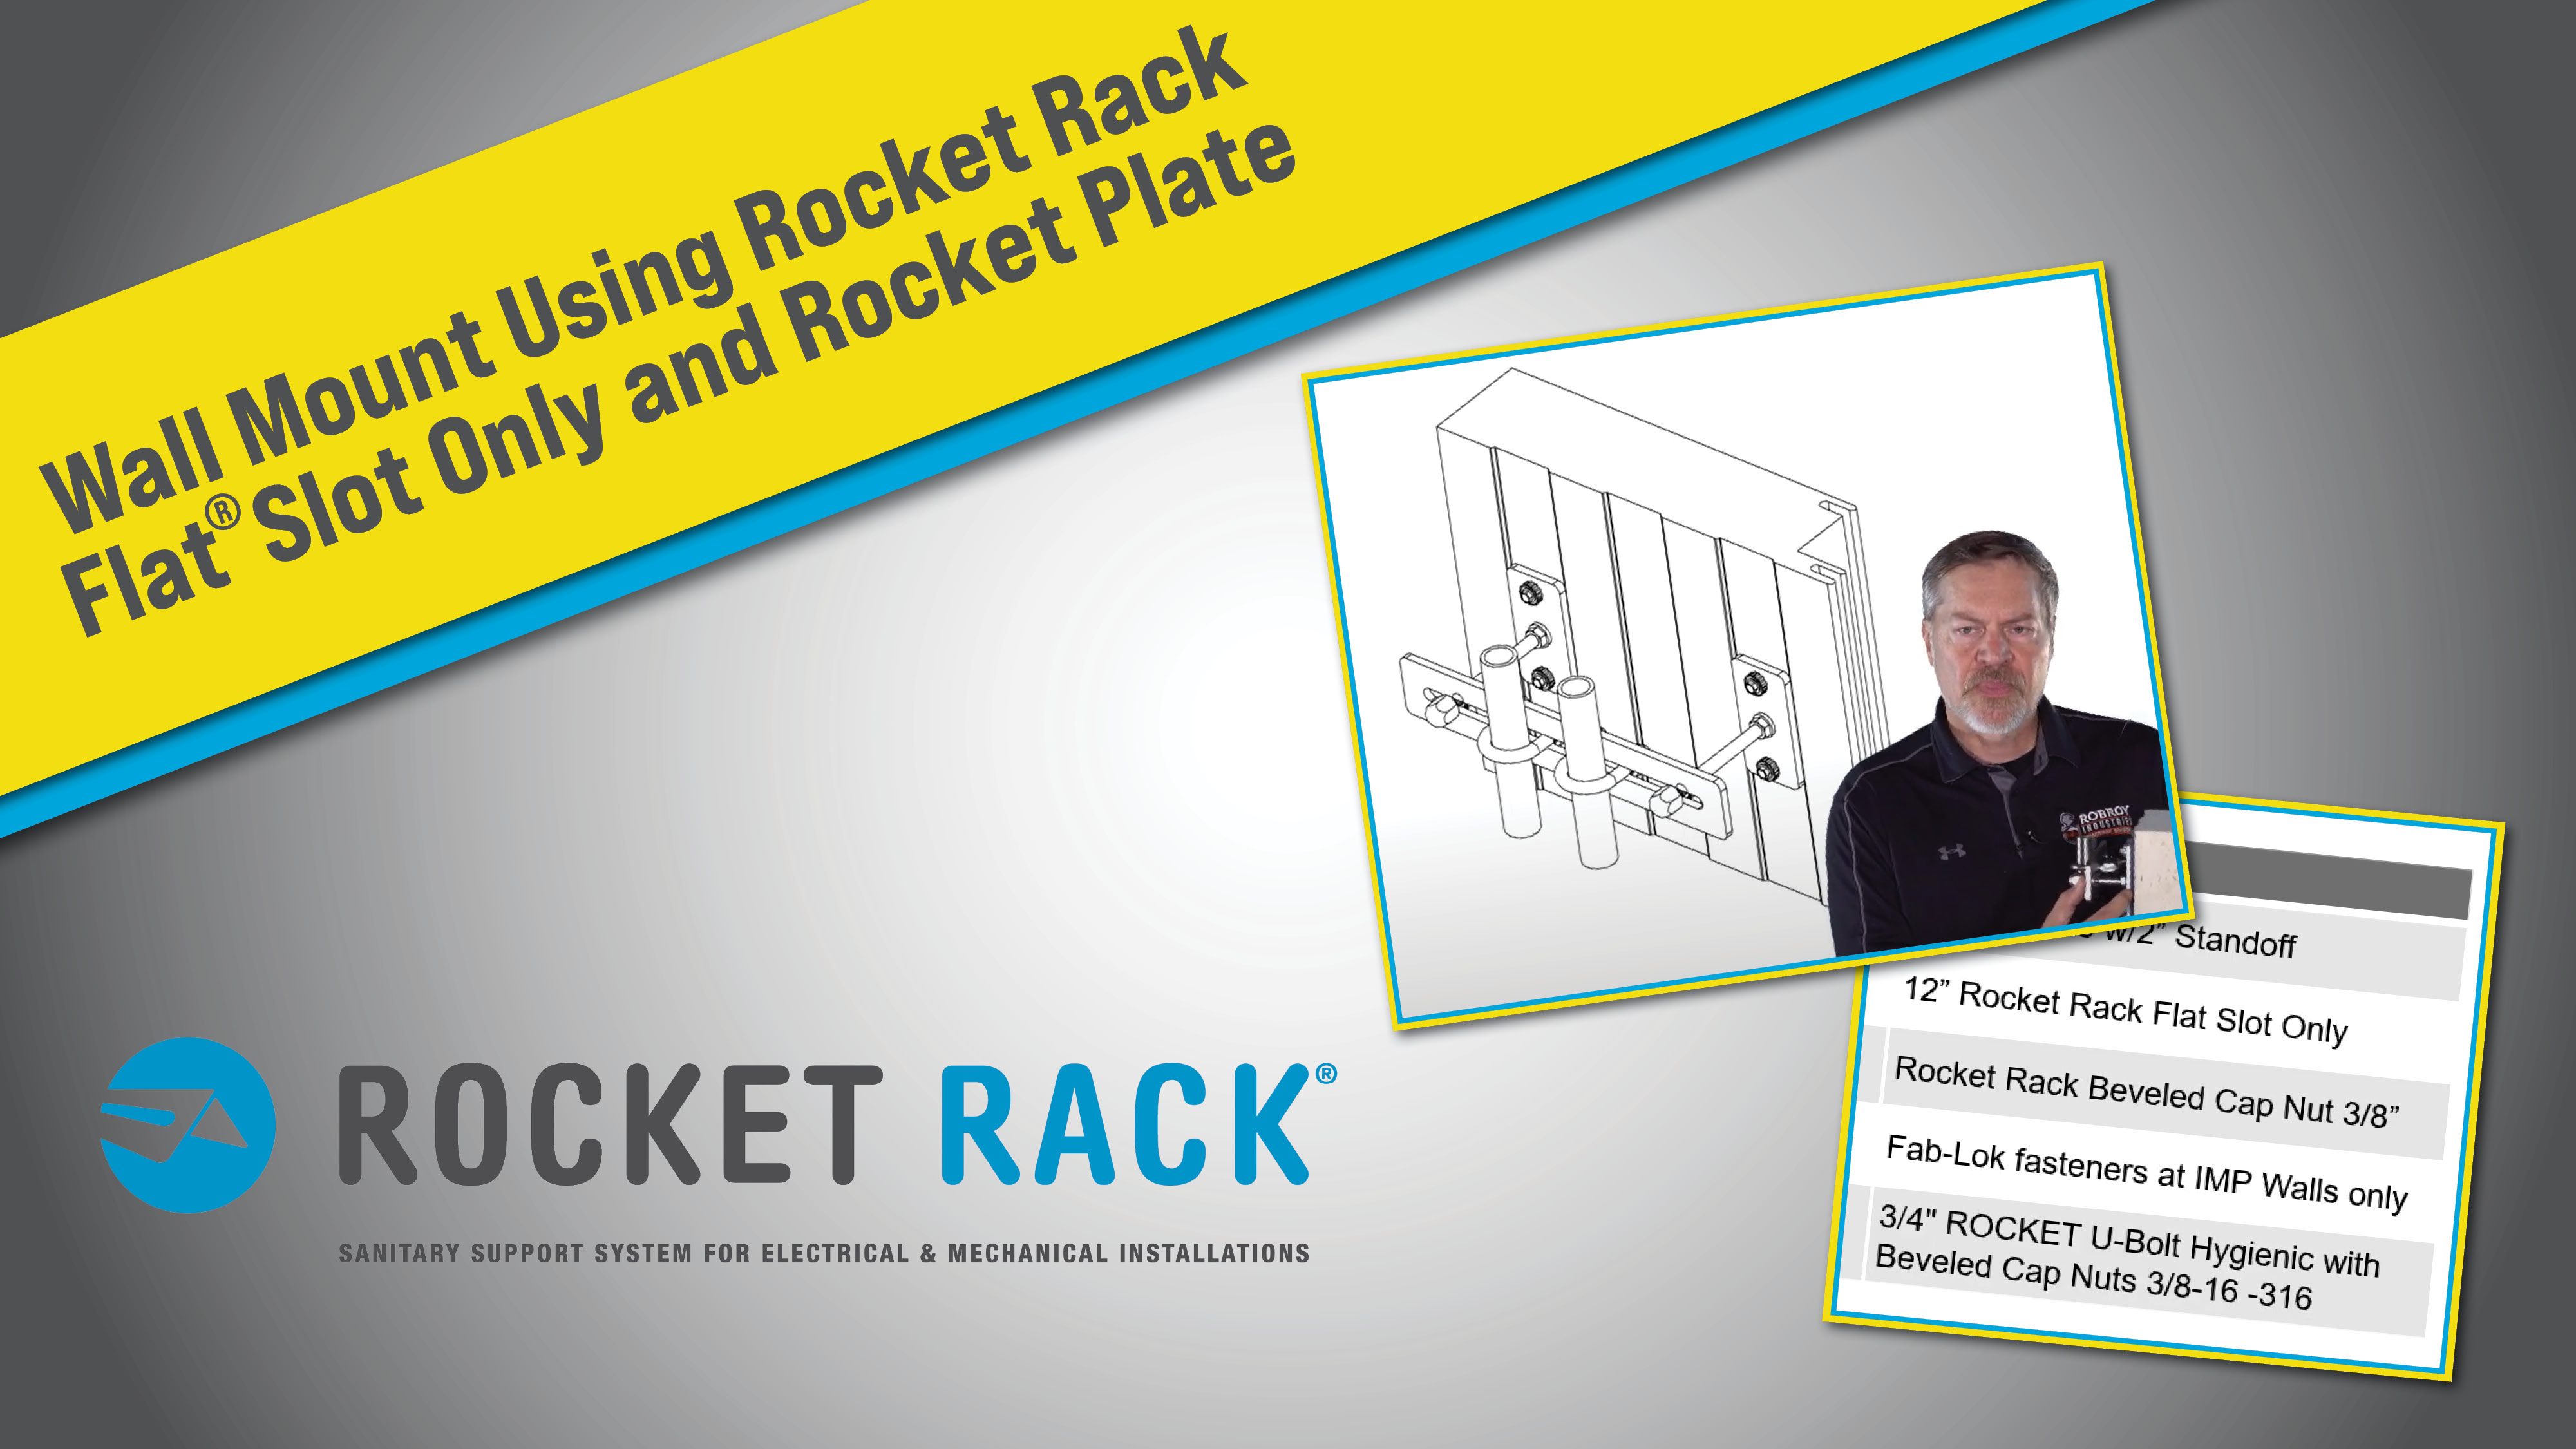 thumbnail for How to Build a Wall Mount Using a Rocket Plate® and Rocket Rack® Flat Slot Only